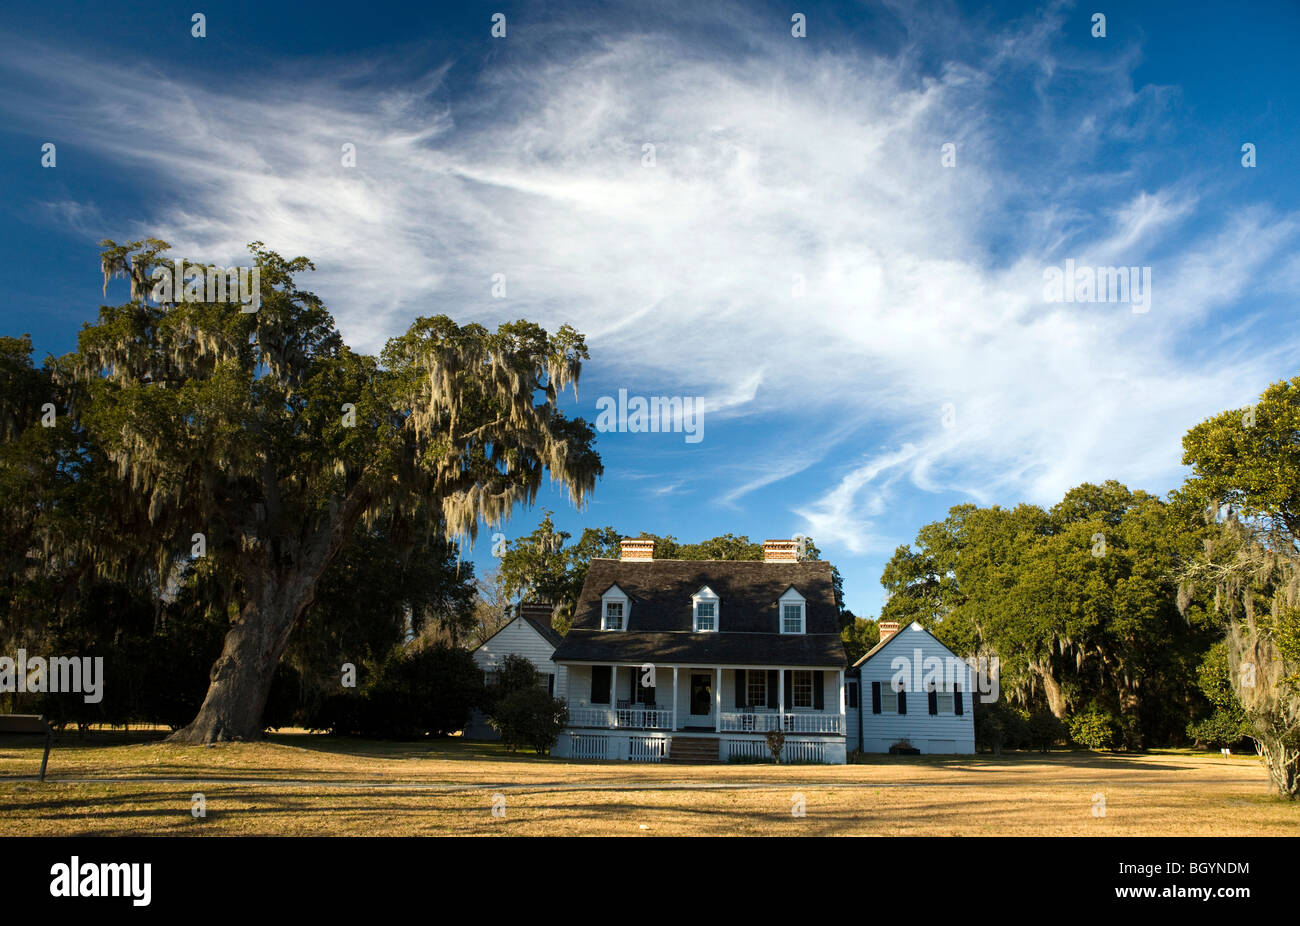 Home on the grounds of the Charles Pinckney National Historic Site, near Charleston, South Carolina, United States of America. Stock Photo